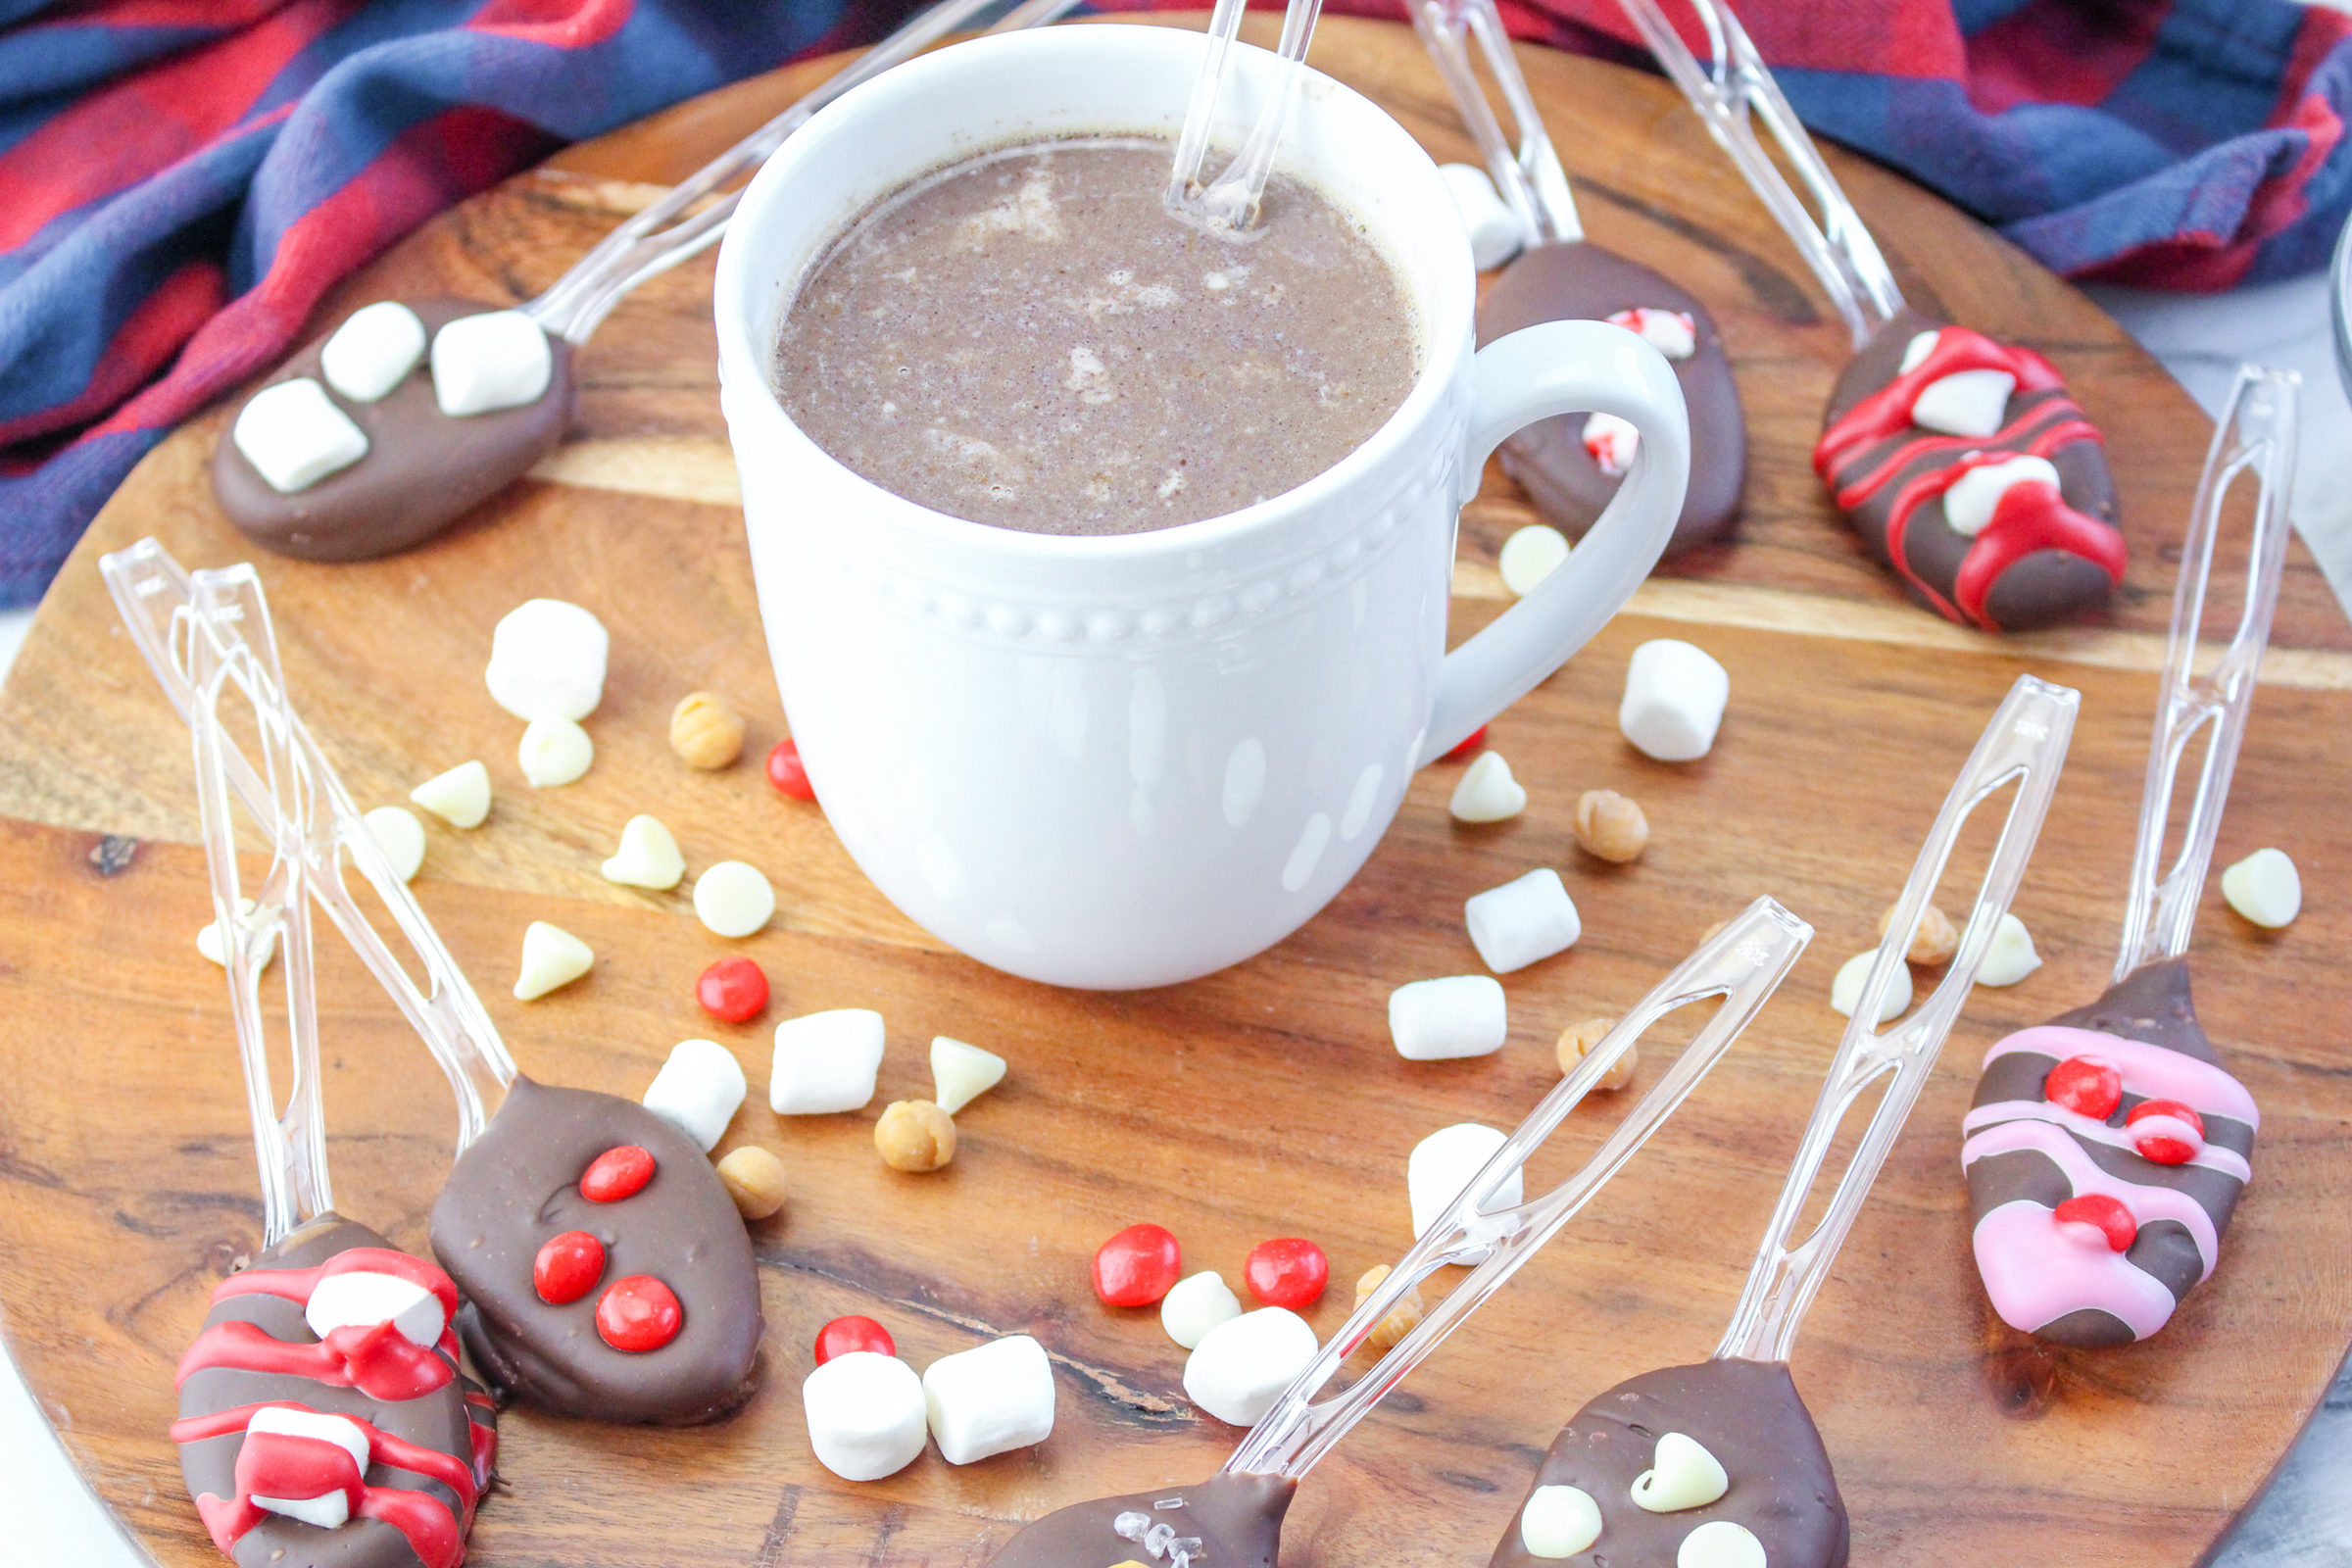 A white mug with hot chocolate and various diy hot chocolate spoons on a wooden background.